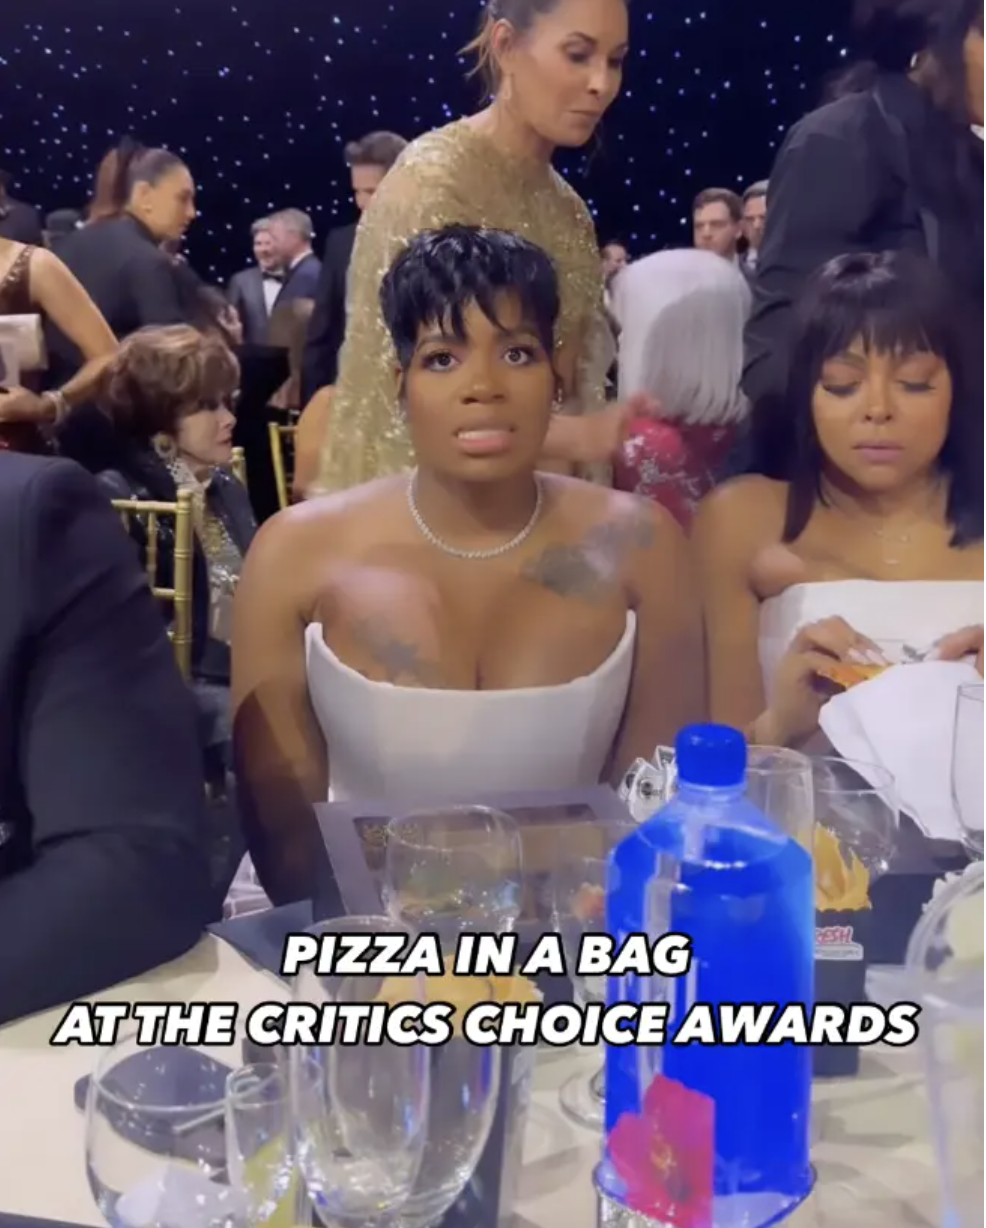 Fantasia Barrino looks grossed out sitting at a table with text pizza in a bag